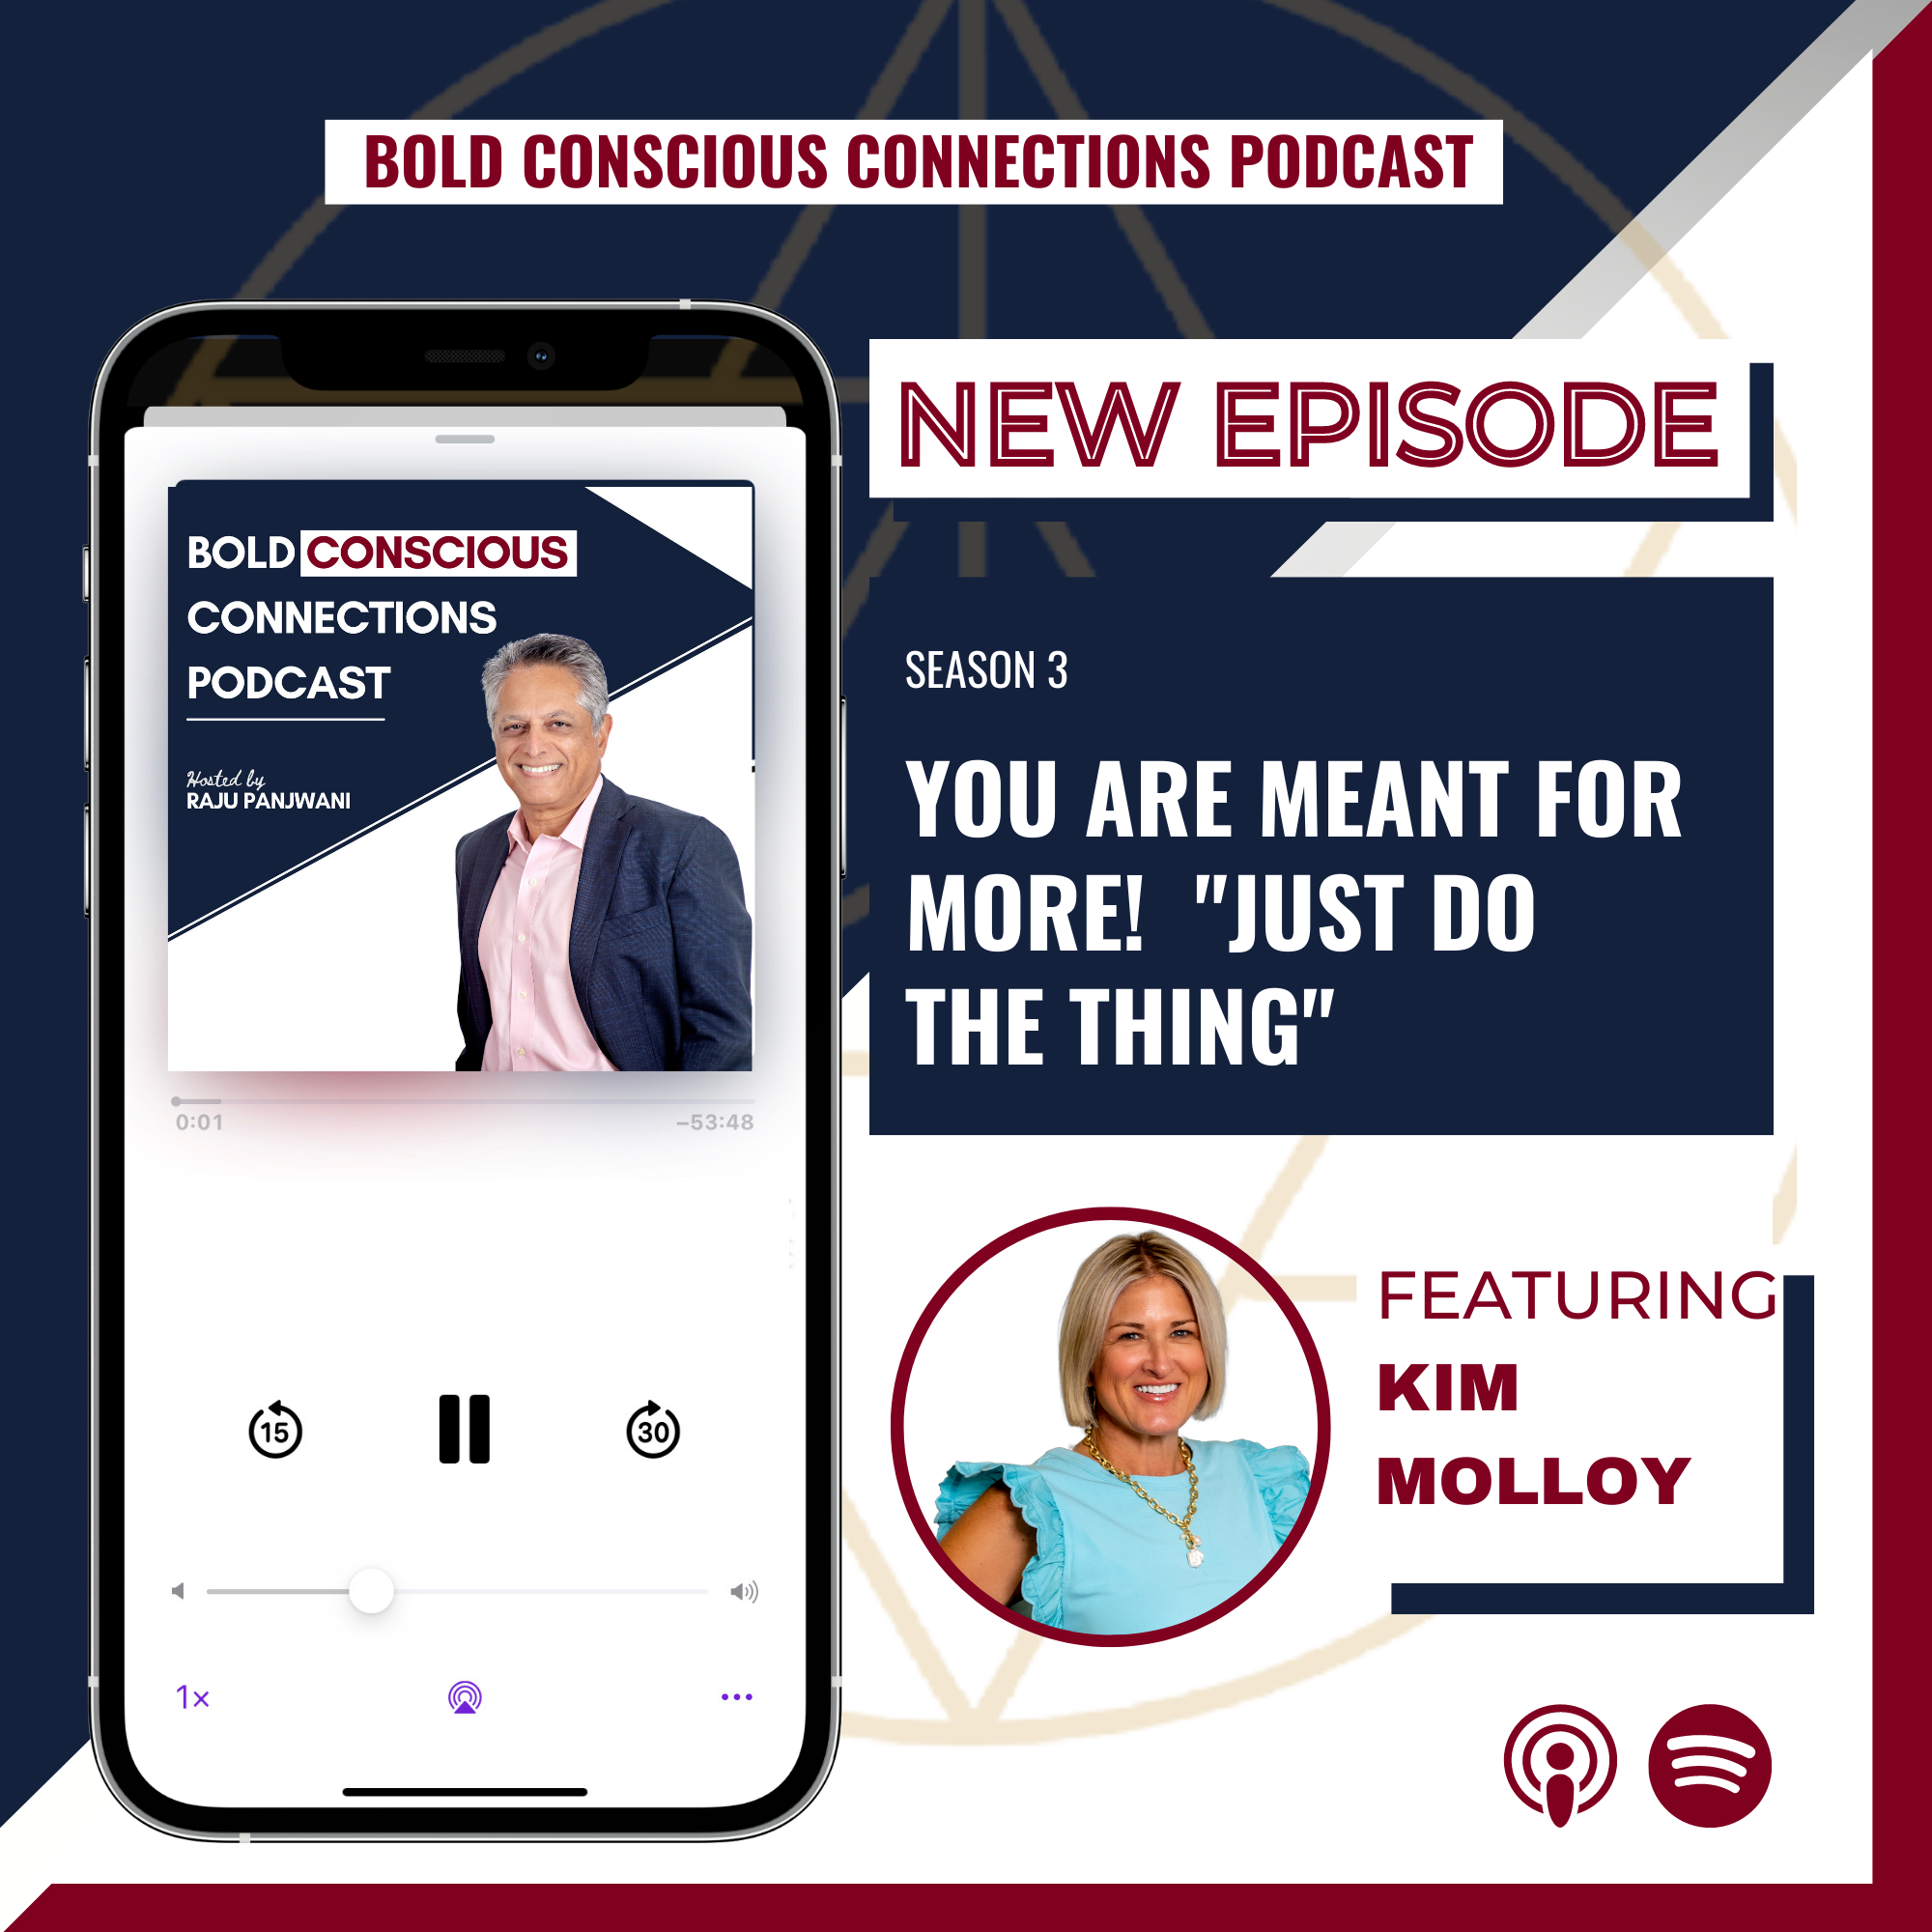 Artwork for podcast BOLD CONSCIOUS CONNECTIONS